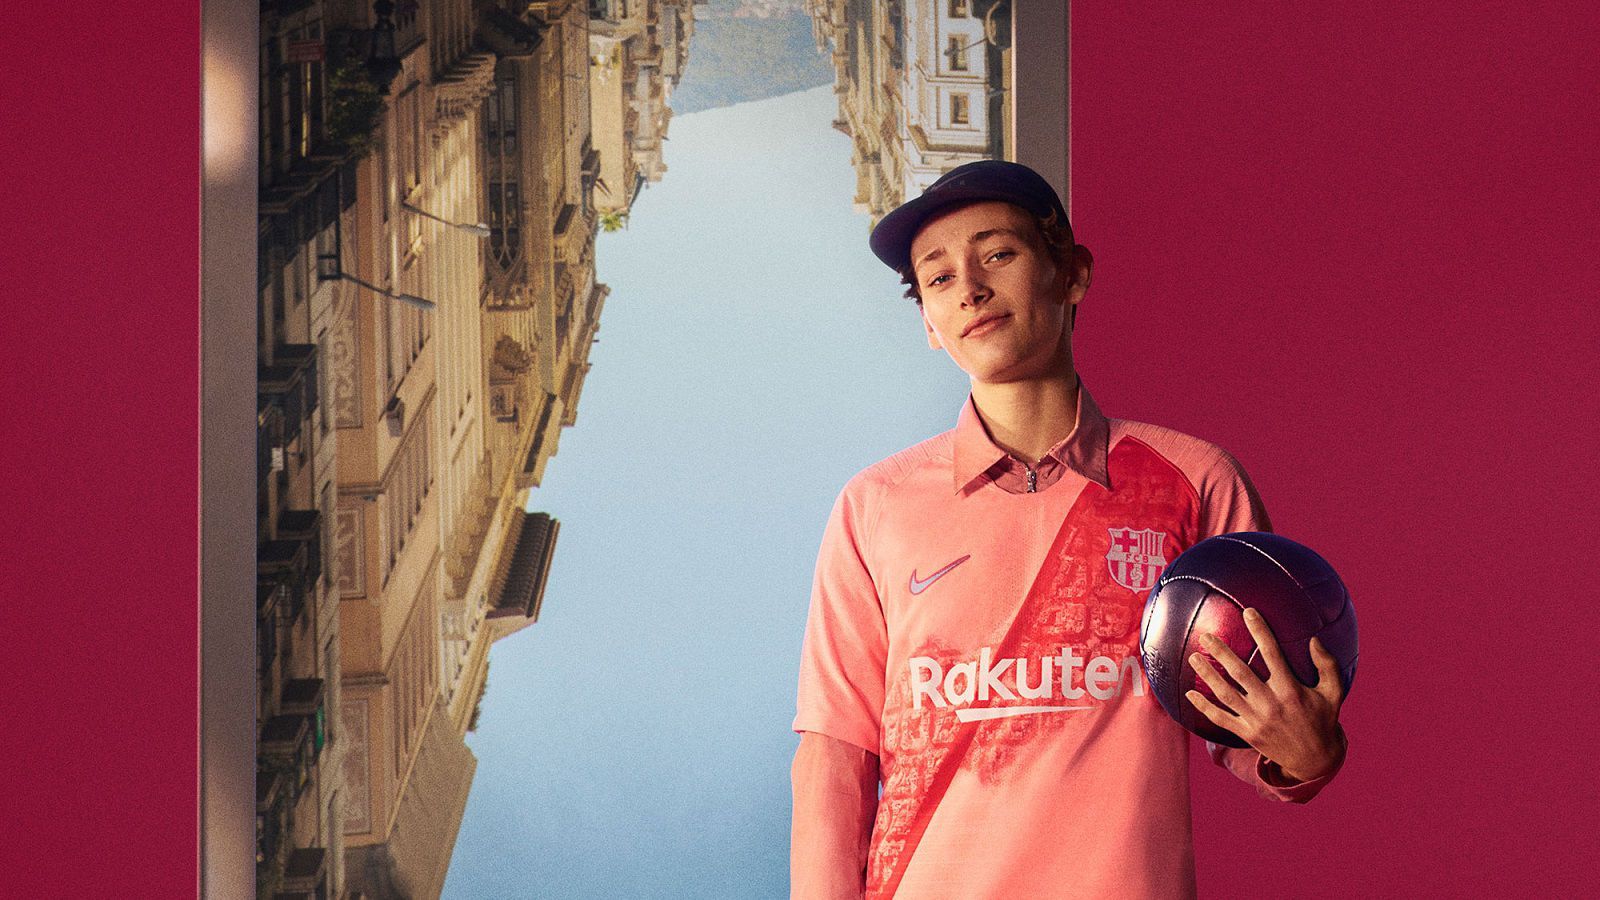 A Twist on Tradition: FC Barcelona's 6 Most Interesting Third Kits - Urban  Pitch